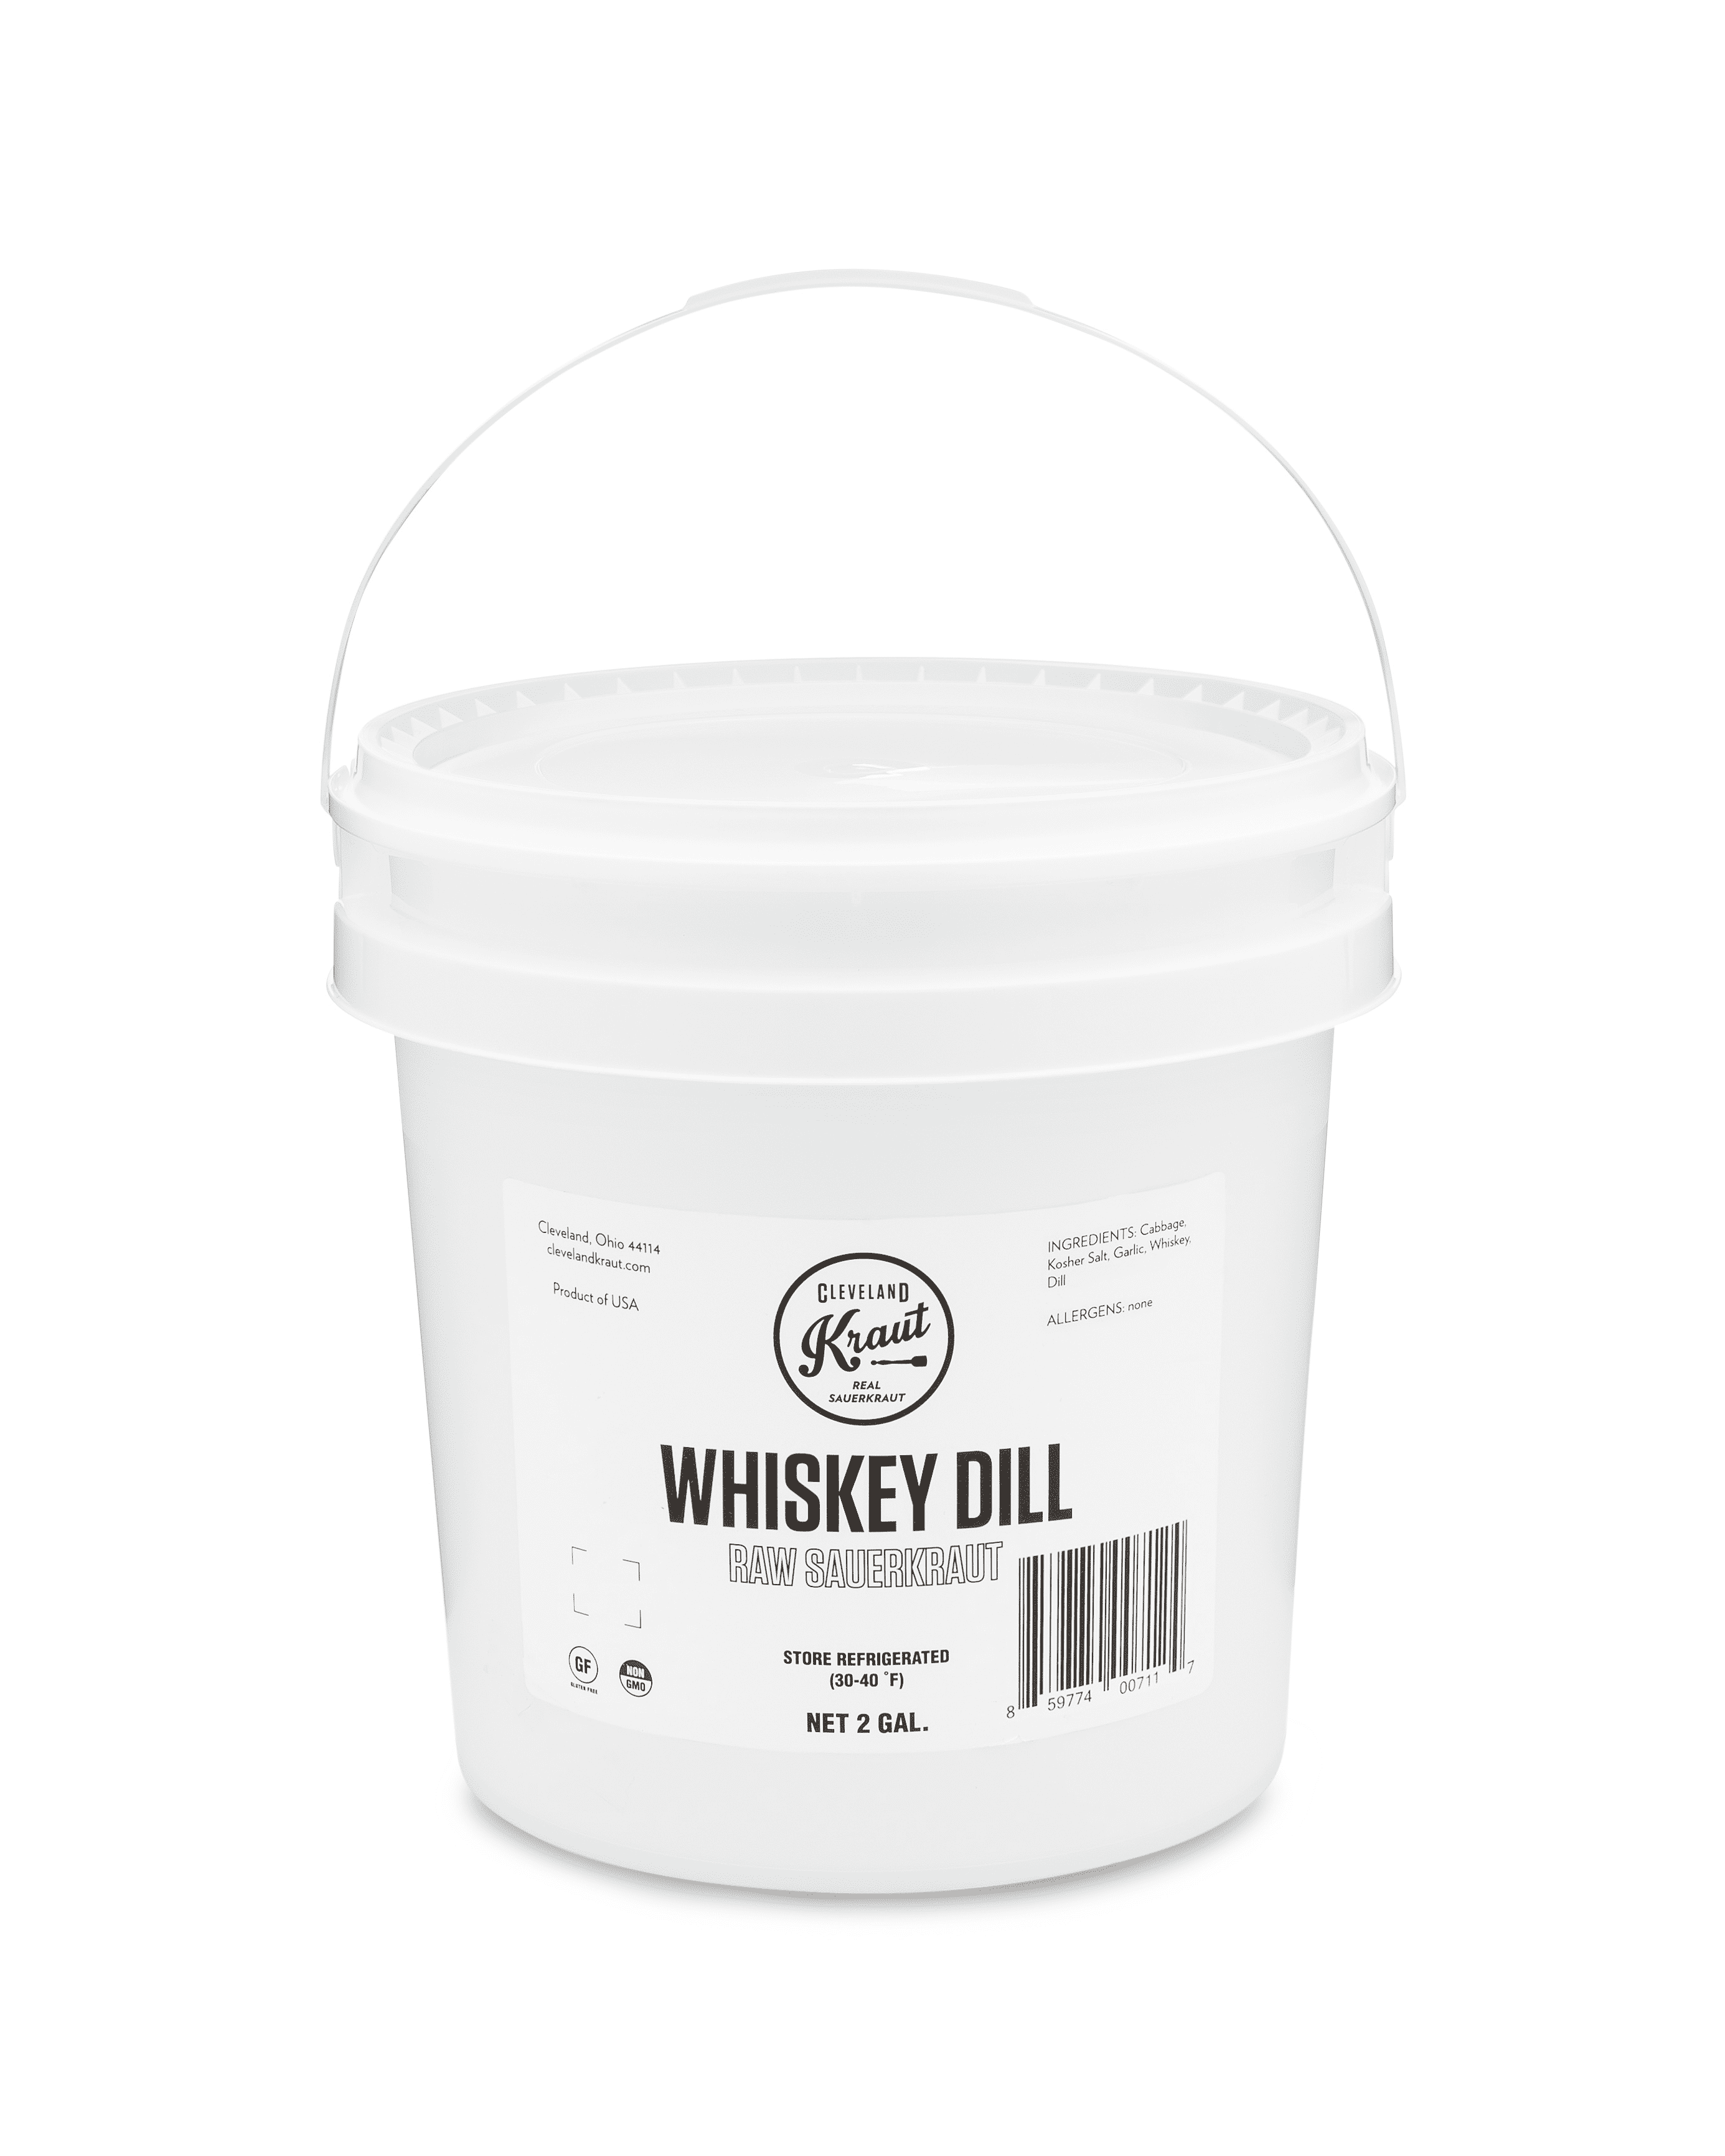 Cleveland Kitchen Whiskey Dill Kraut (2Gal, Food Service) 1 units per case 2.0 gal